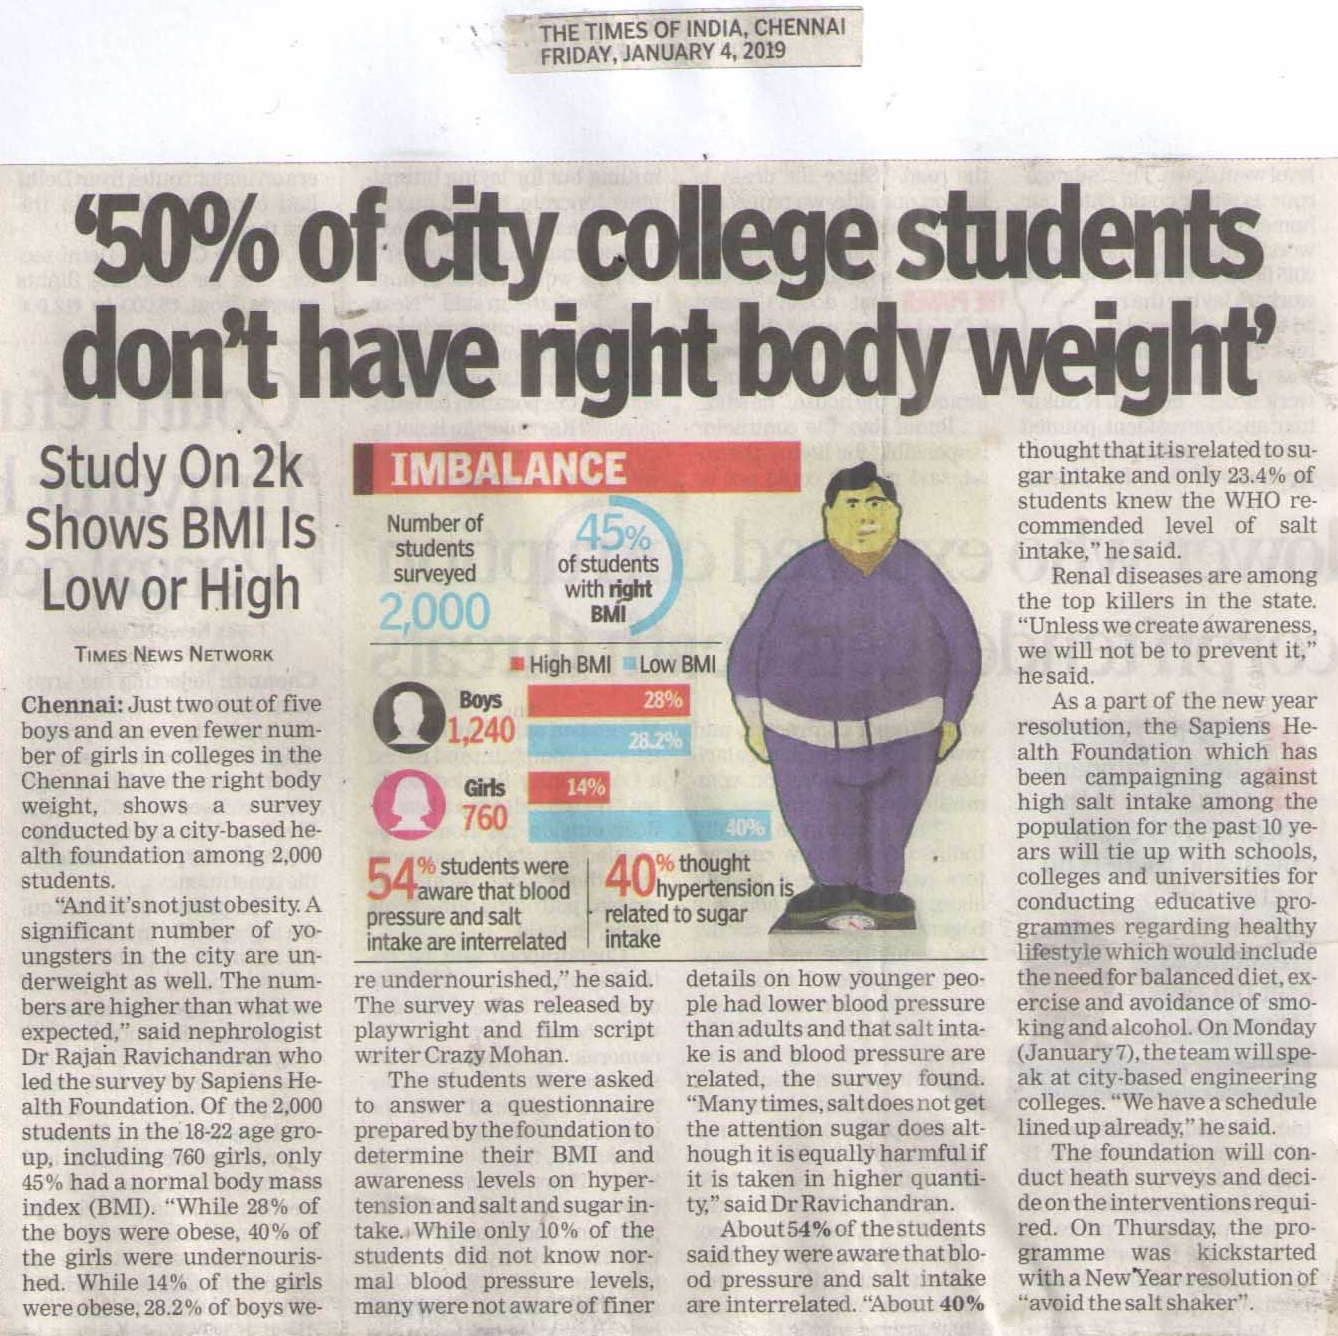 Times of India - Paper cutting